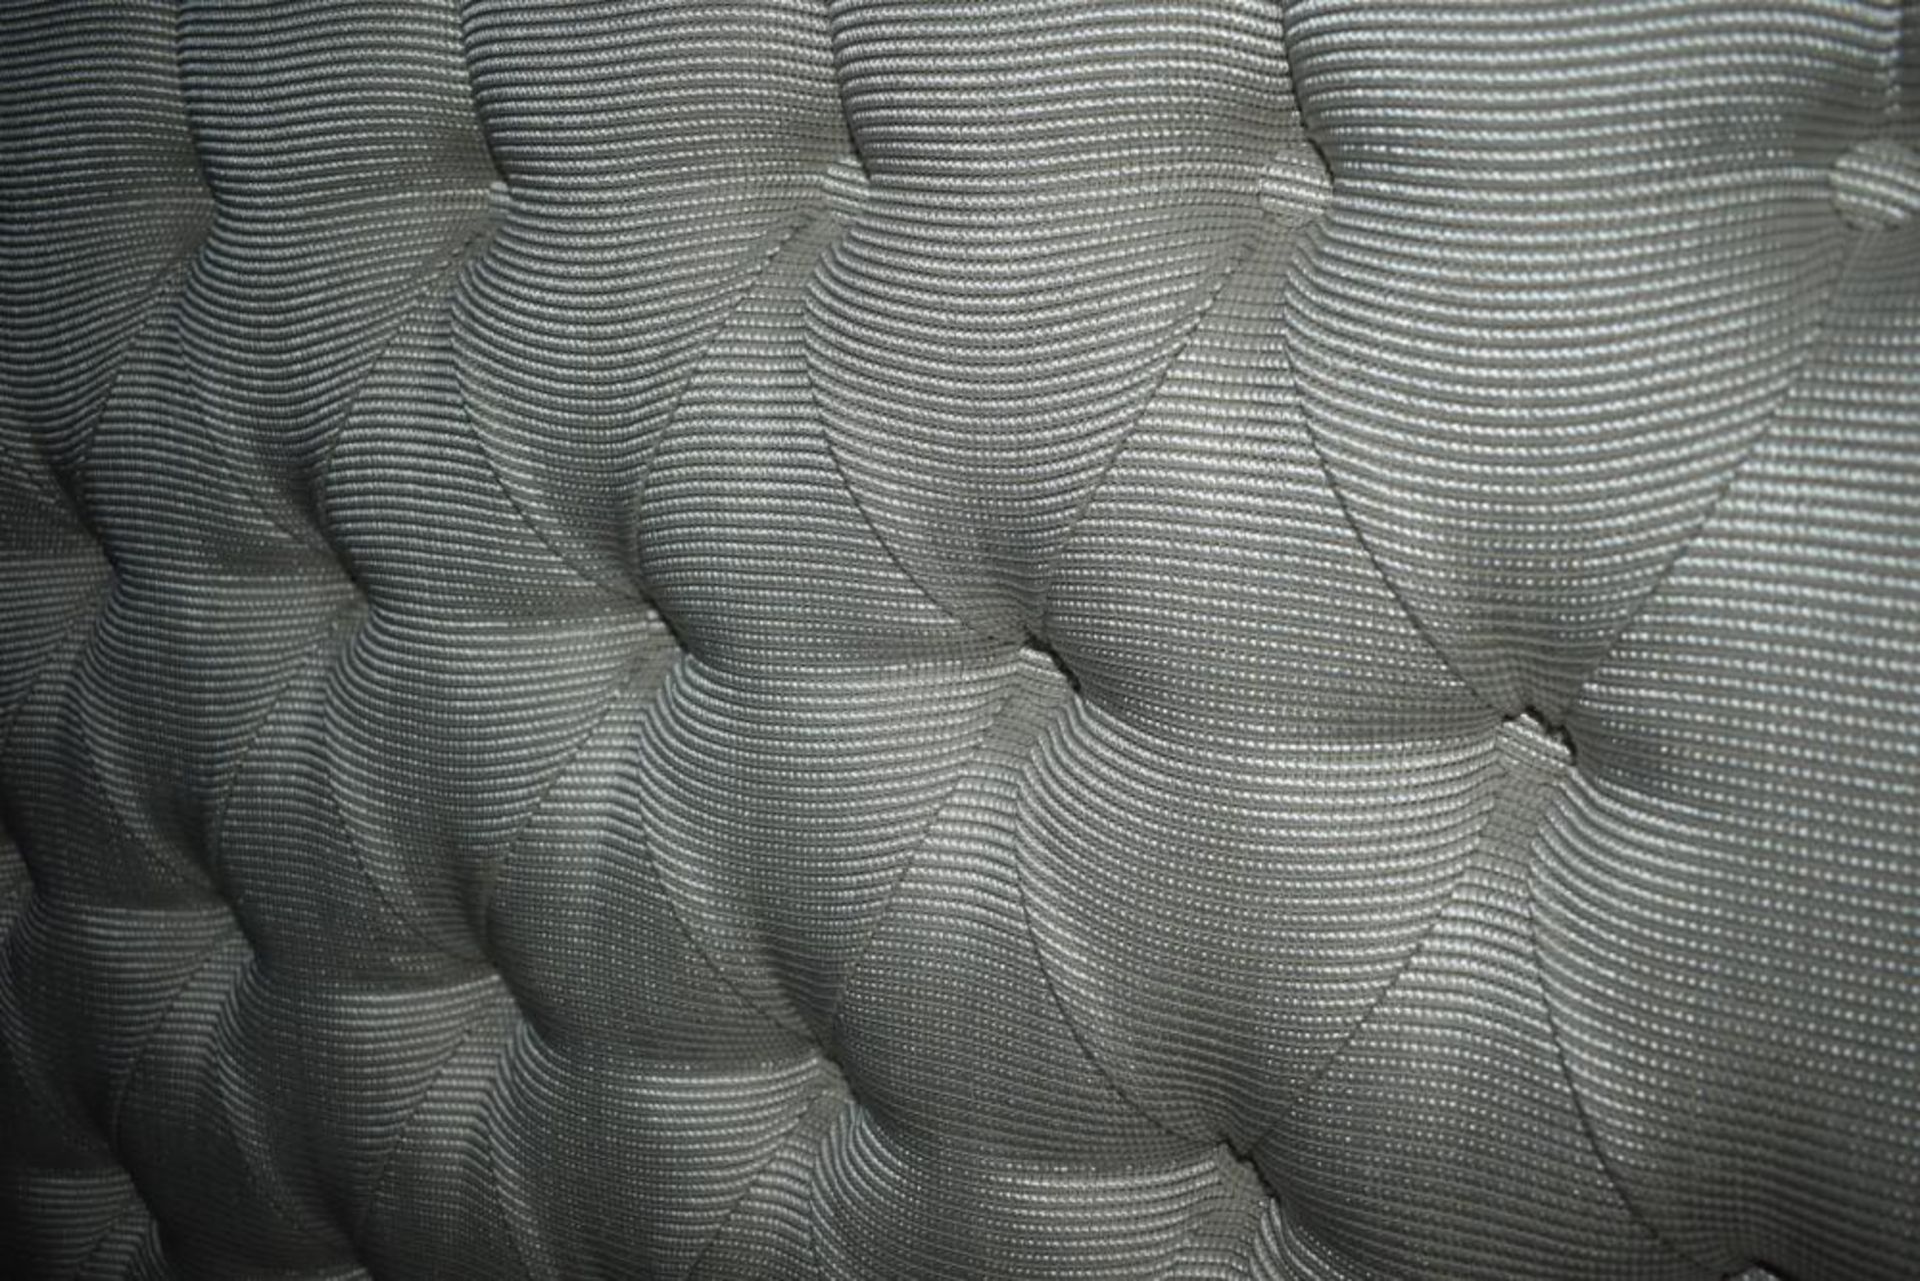 1 x Upholstered Button-Back Headboard - Dimensions (approx): W148 x H100 x D7cm - Ref: ABR062 / GR - - Image 2 of 2